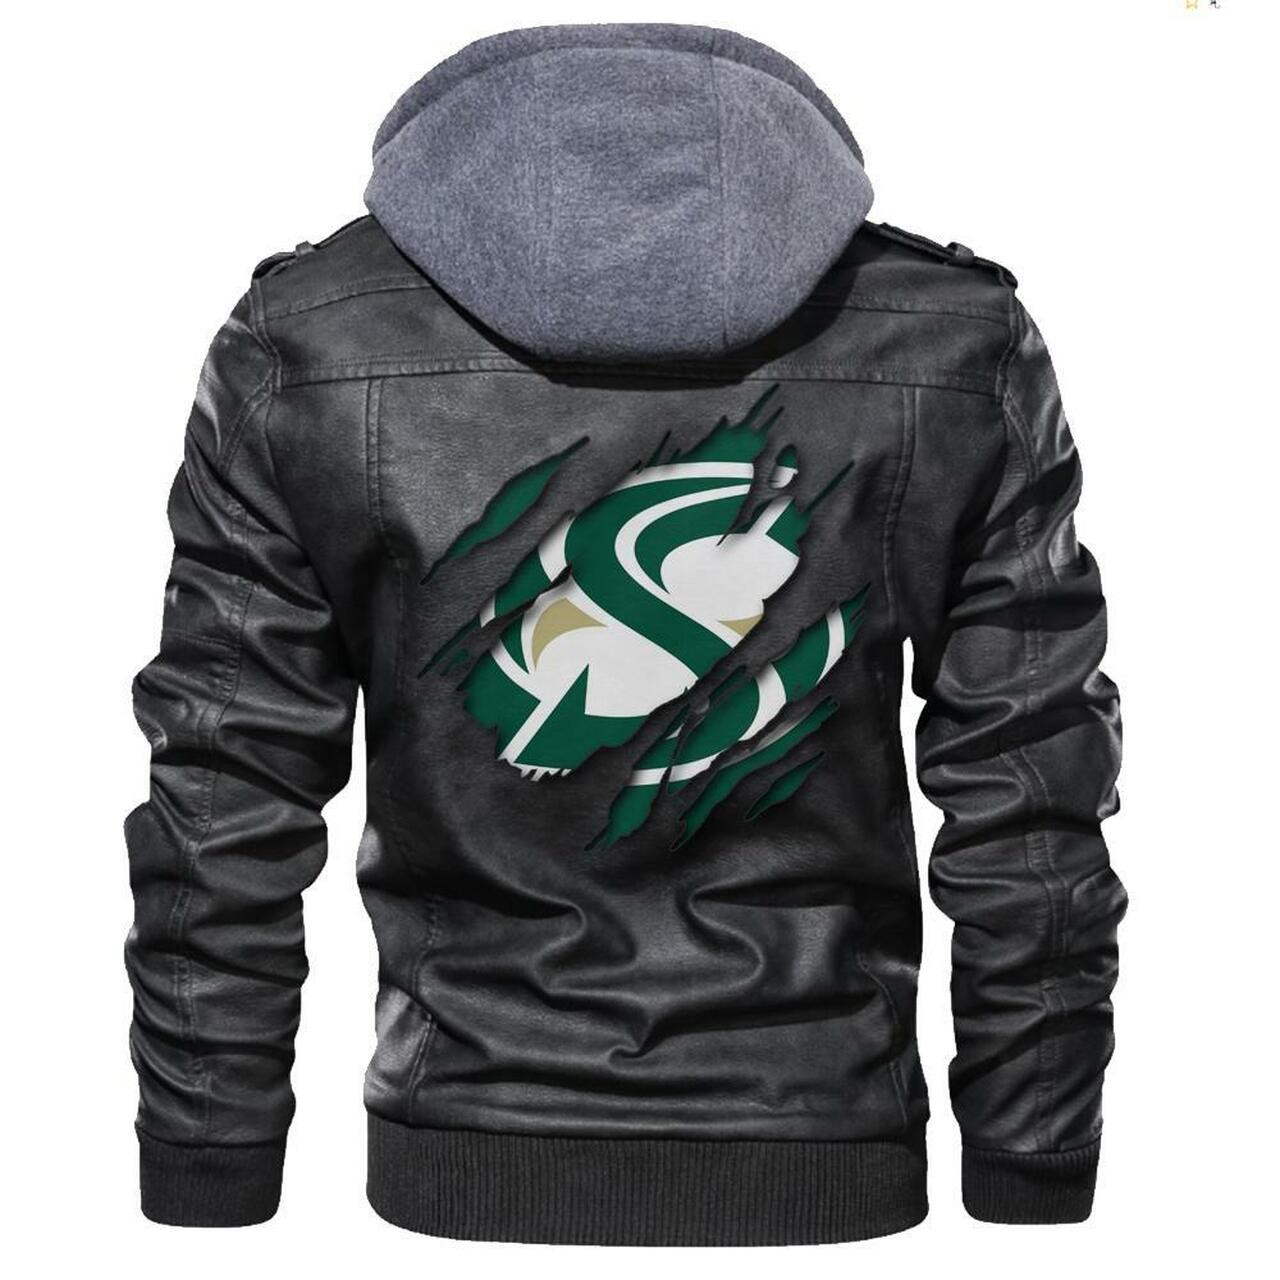 You can find Leather Jacket online at a great price 16